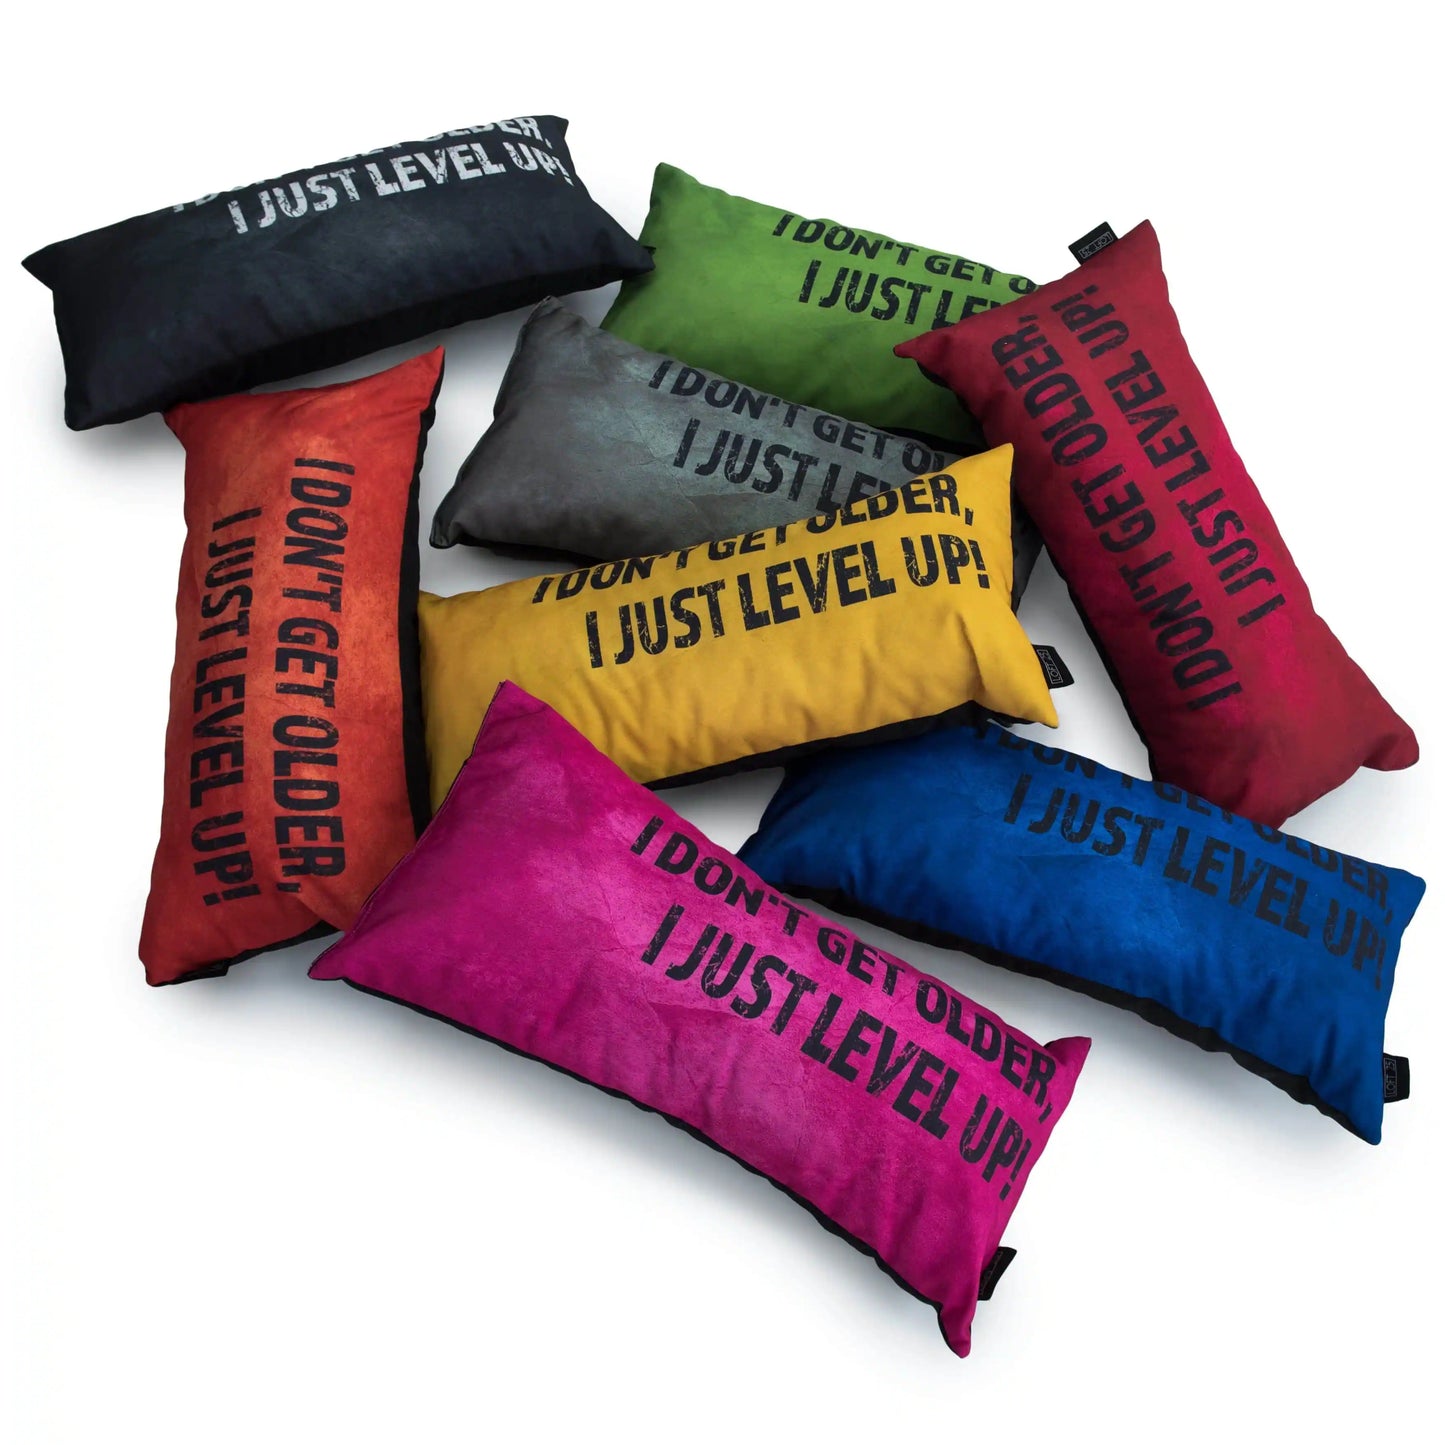 A group of colorful pillows.